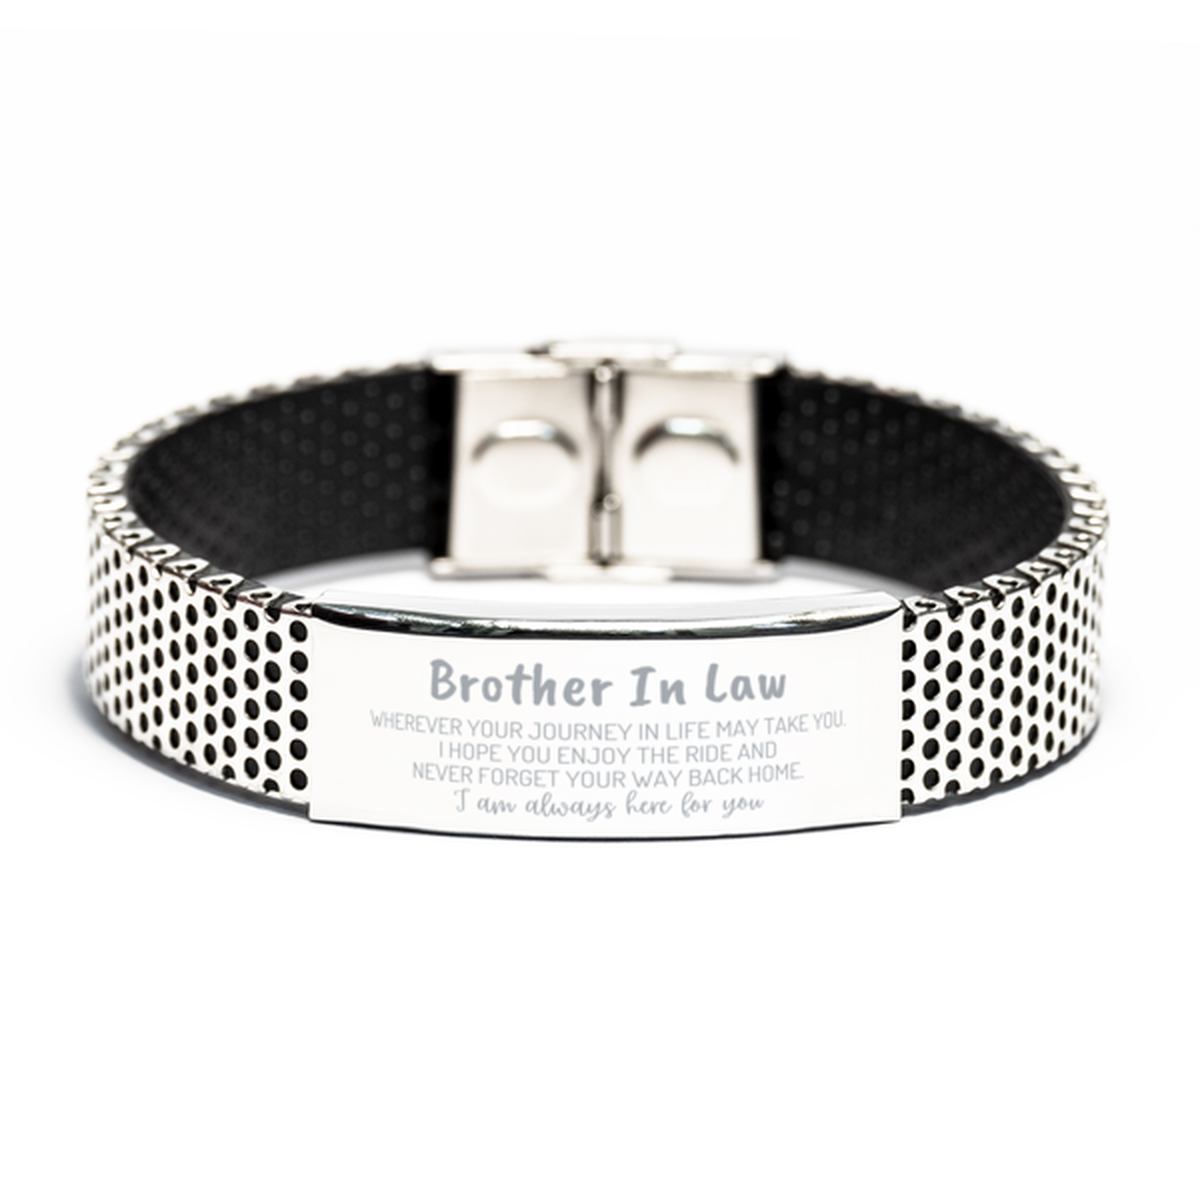 Brother In Law wherever your journey in life may take you, I am always here for you Brother In Law Stainless Steel Bracelet, Awesome Christmas Gifts For Brother In Law, Brother In Law Birthday Gifts for Men Women Family Loved One